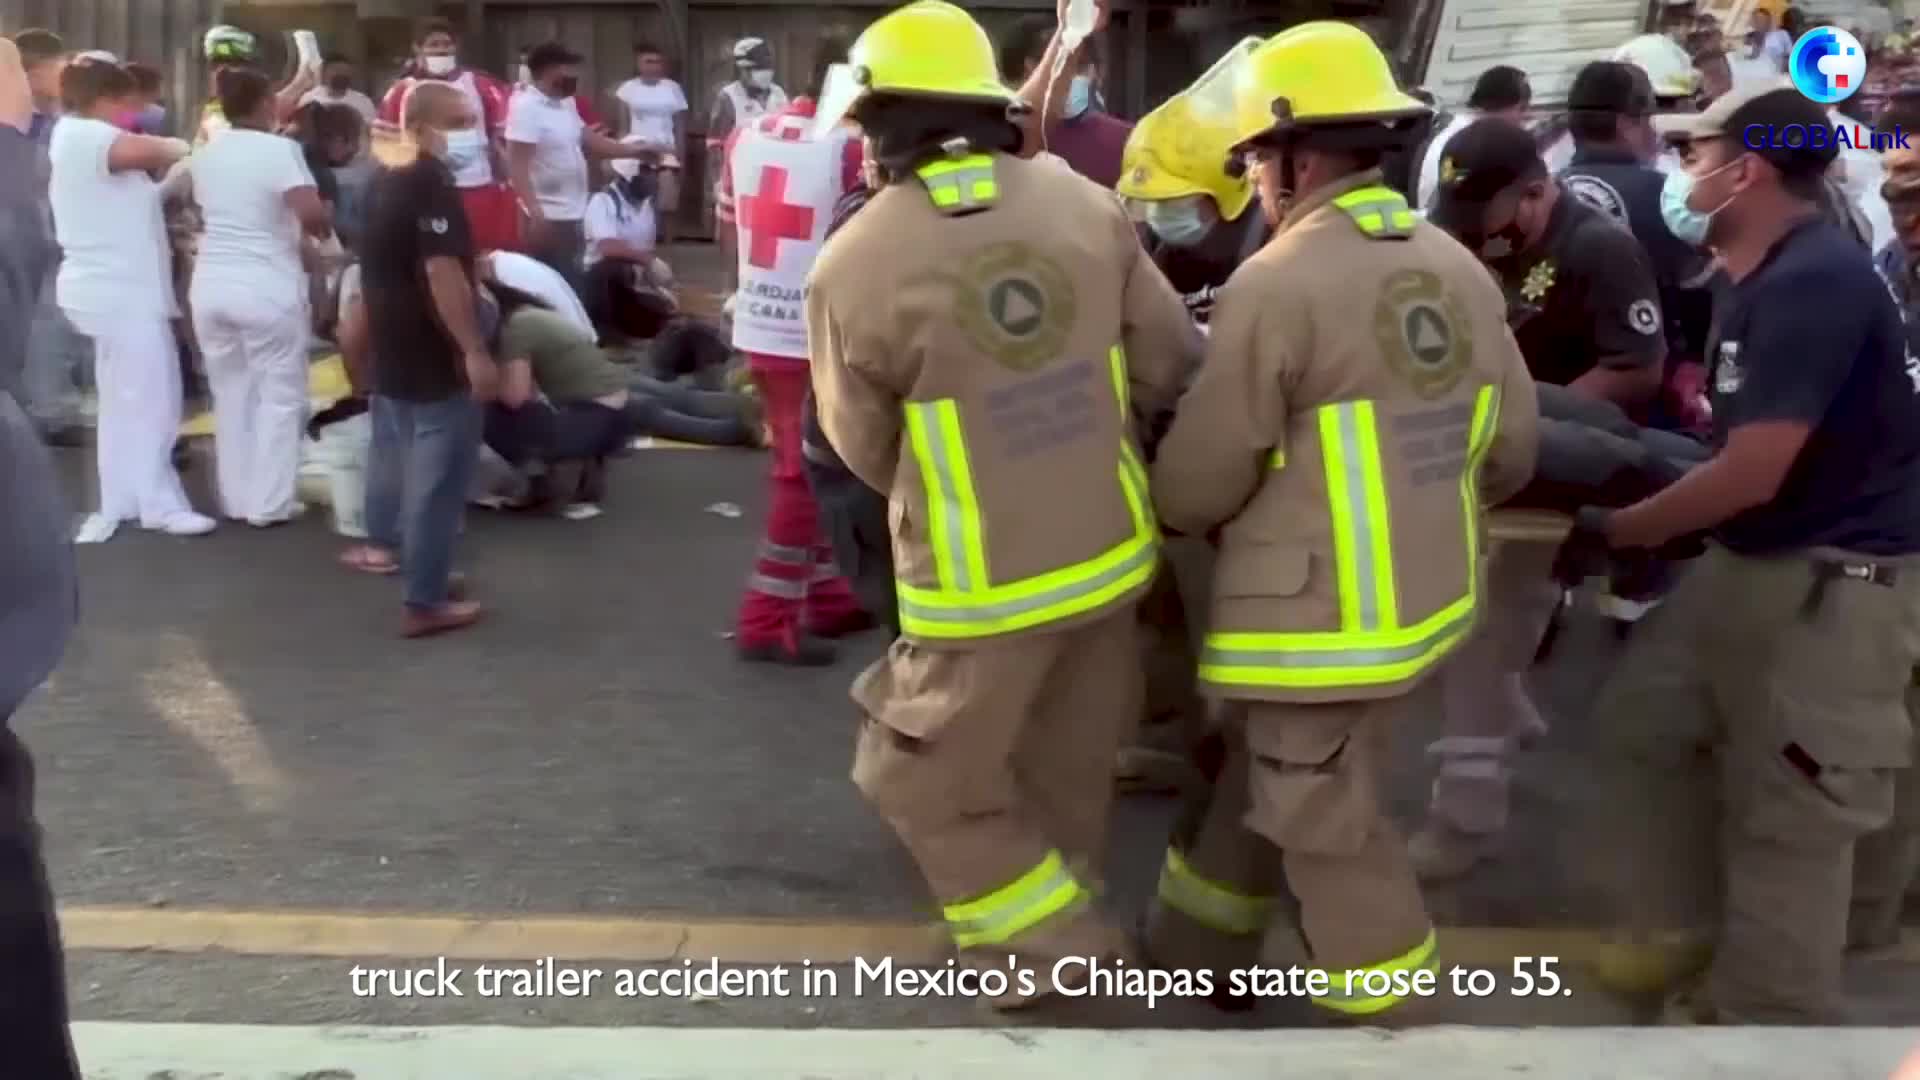 GLOBALink | Mexico truck crash kills at least 55, action group founded to combat migrant smuggling